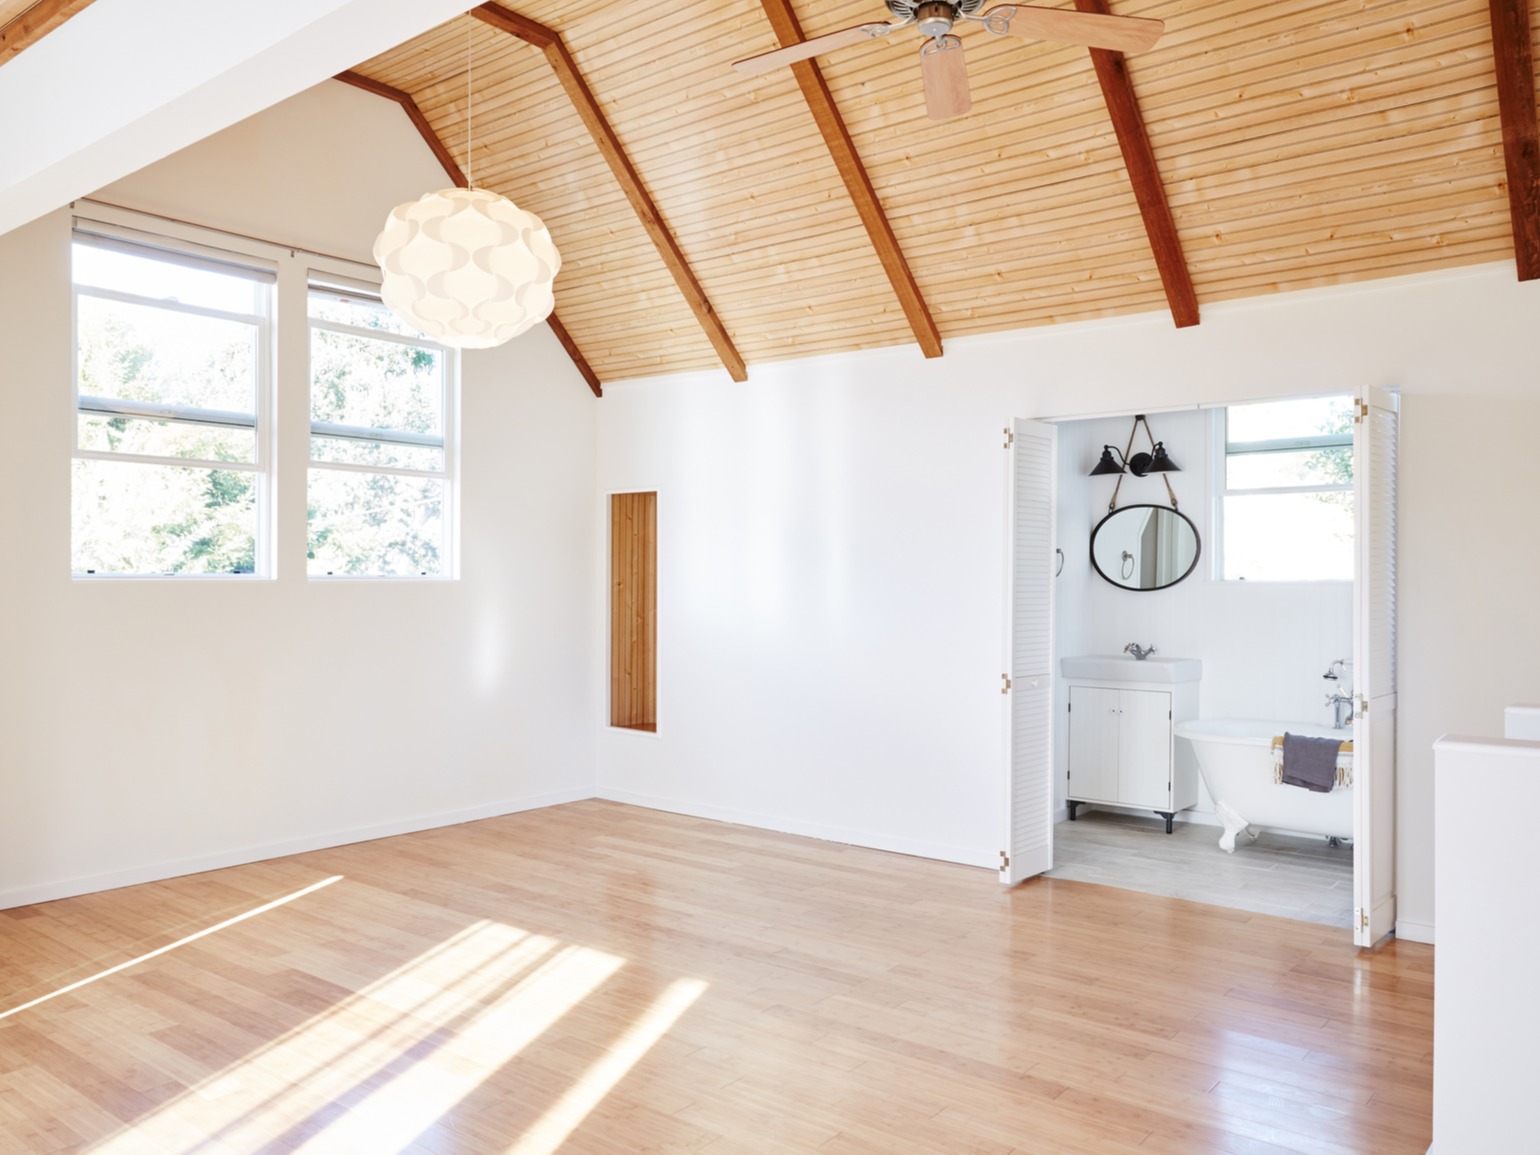 How to Clean Bamboo Floors 